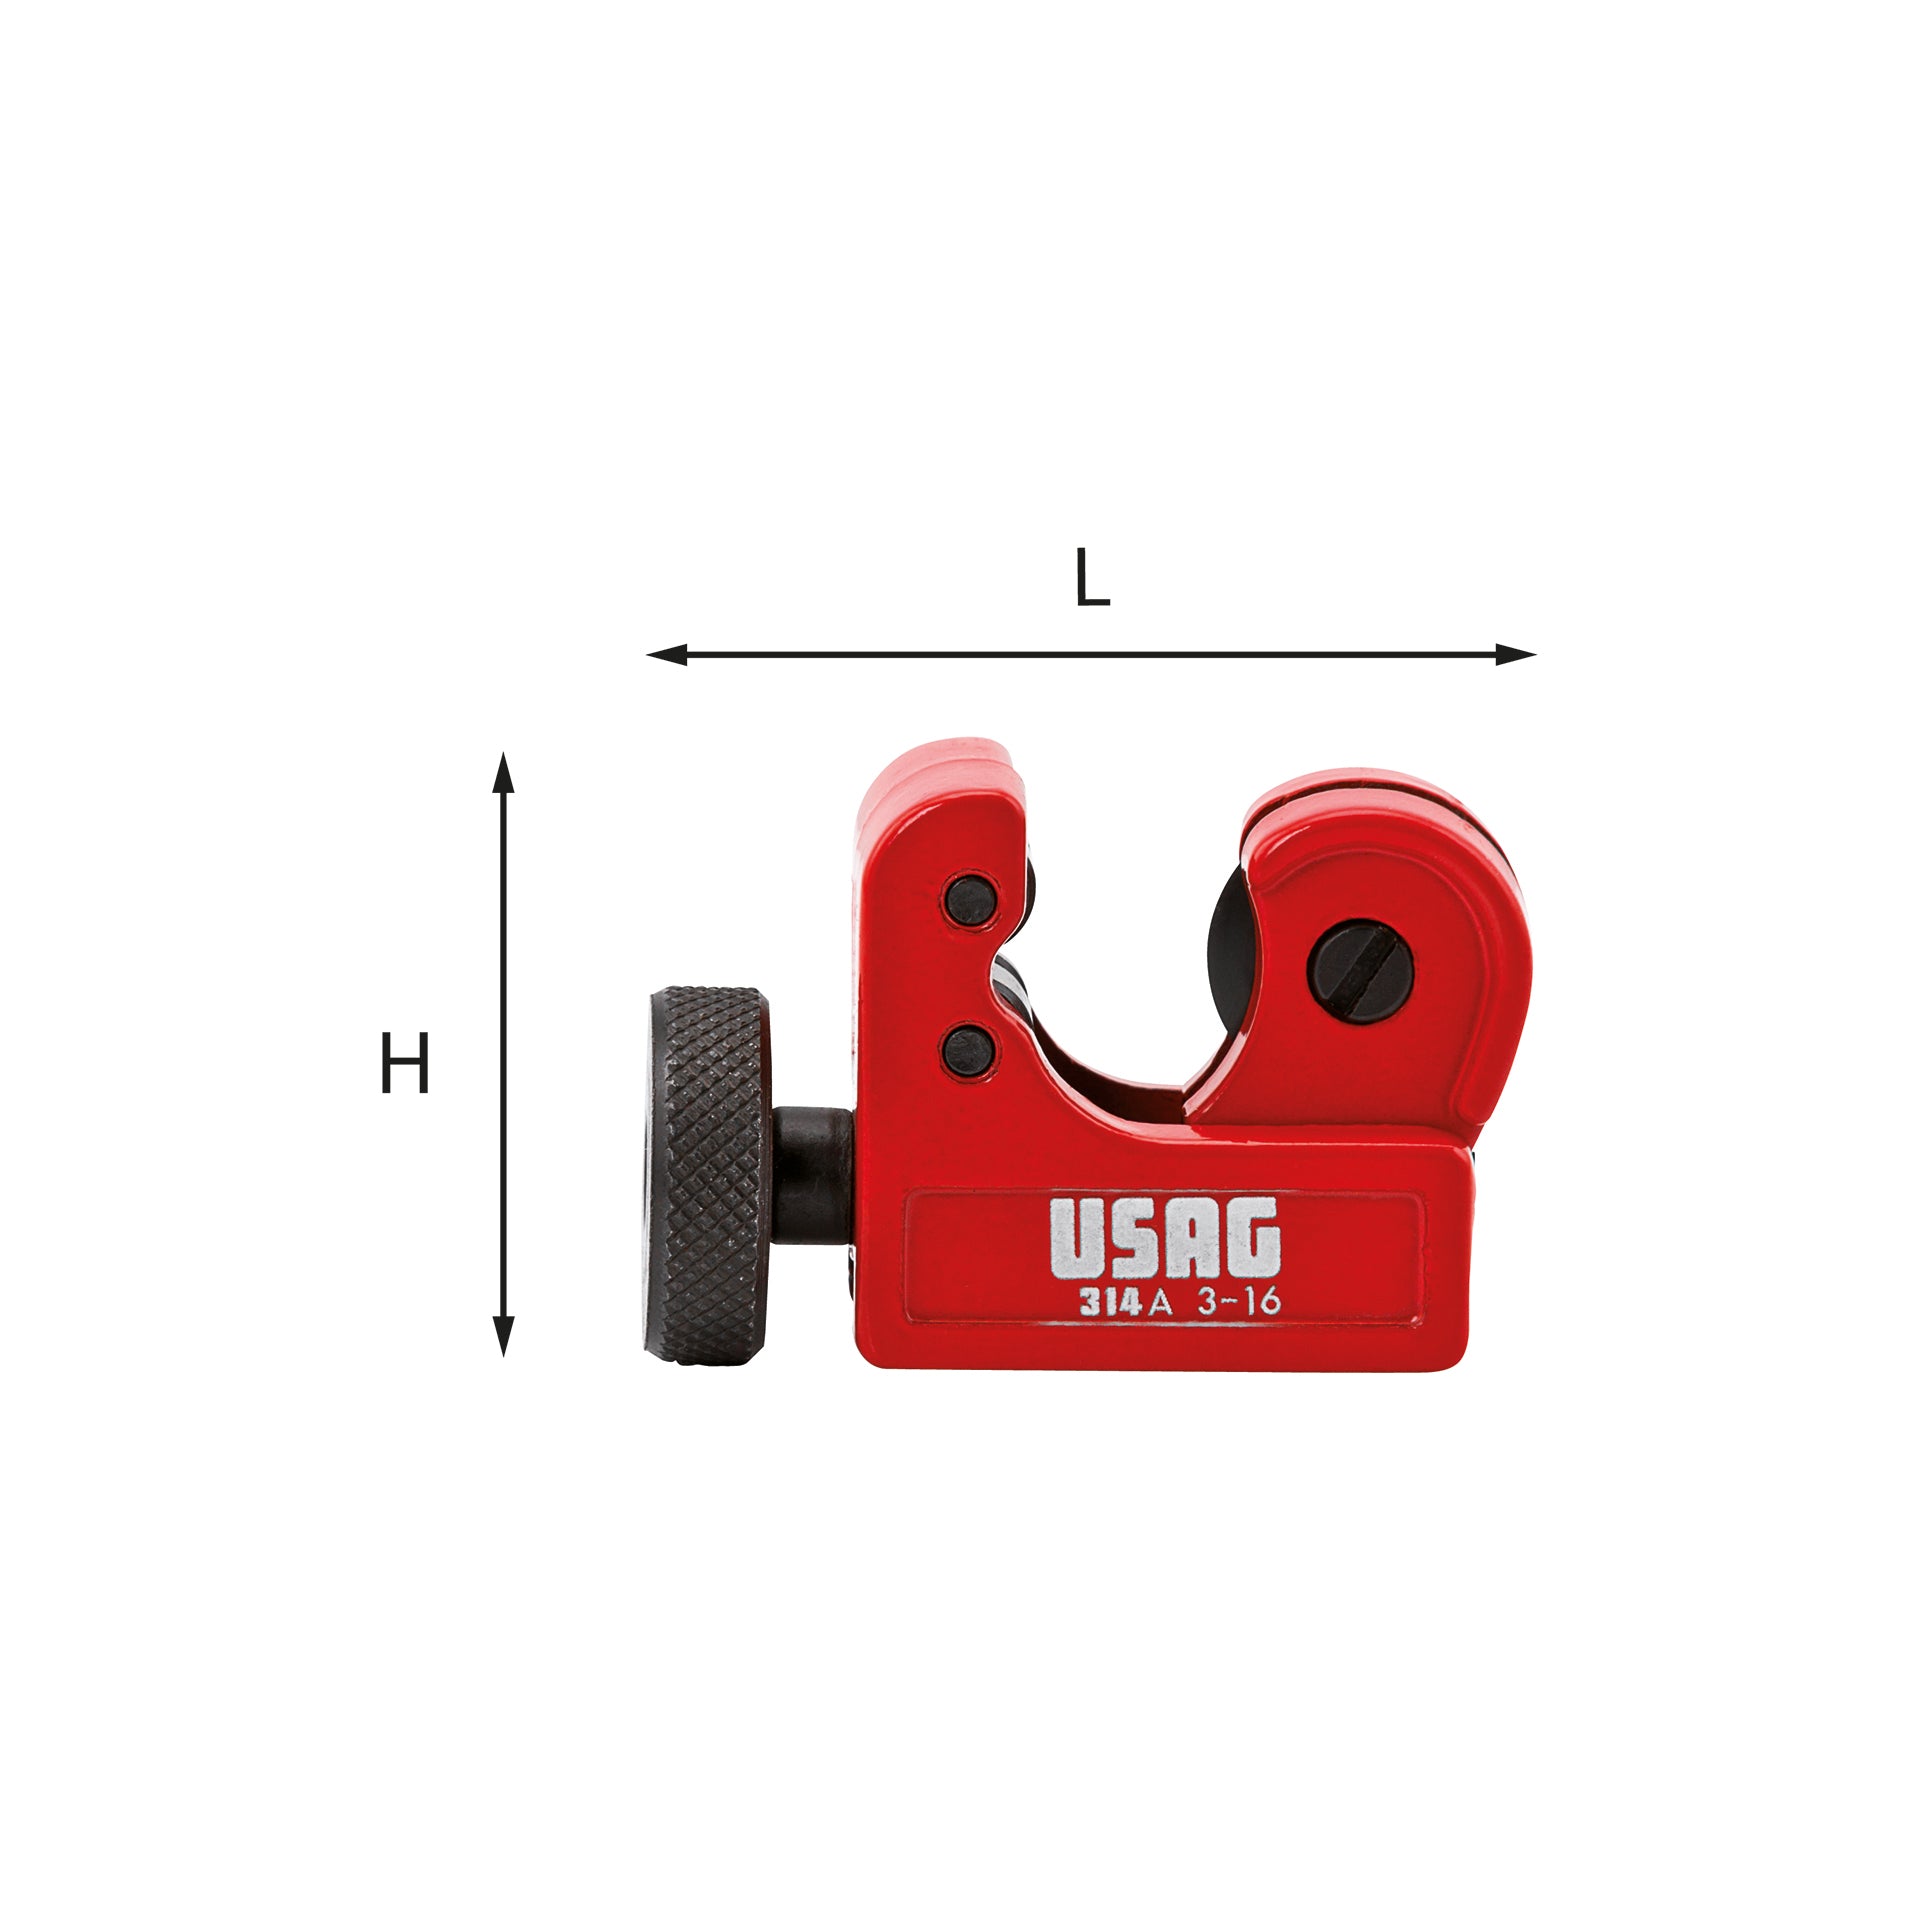 Tube pipe cutter for copper and light alloy tubes Ø 3÷16mm Ø 1/8-5/8" Usag 314 A